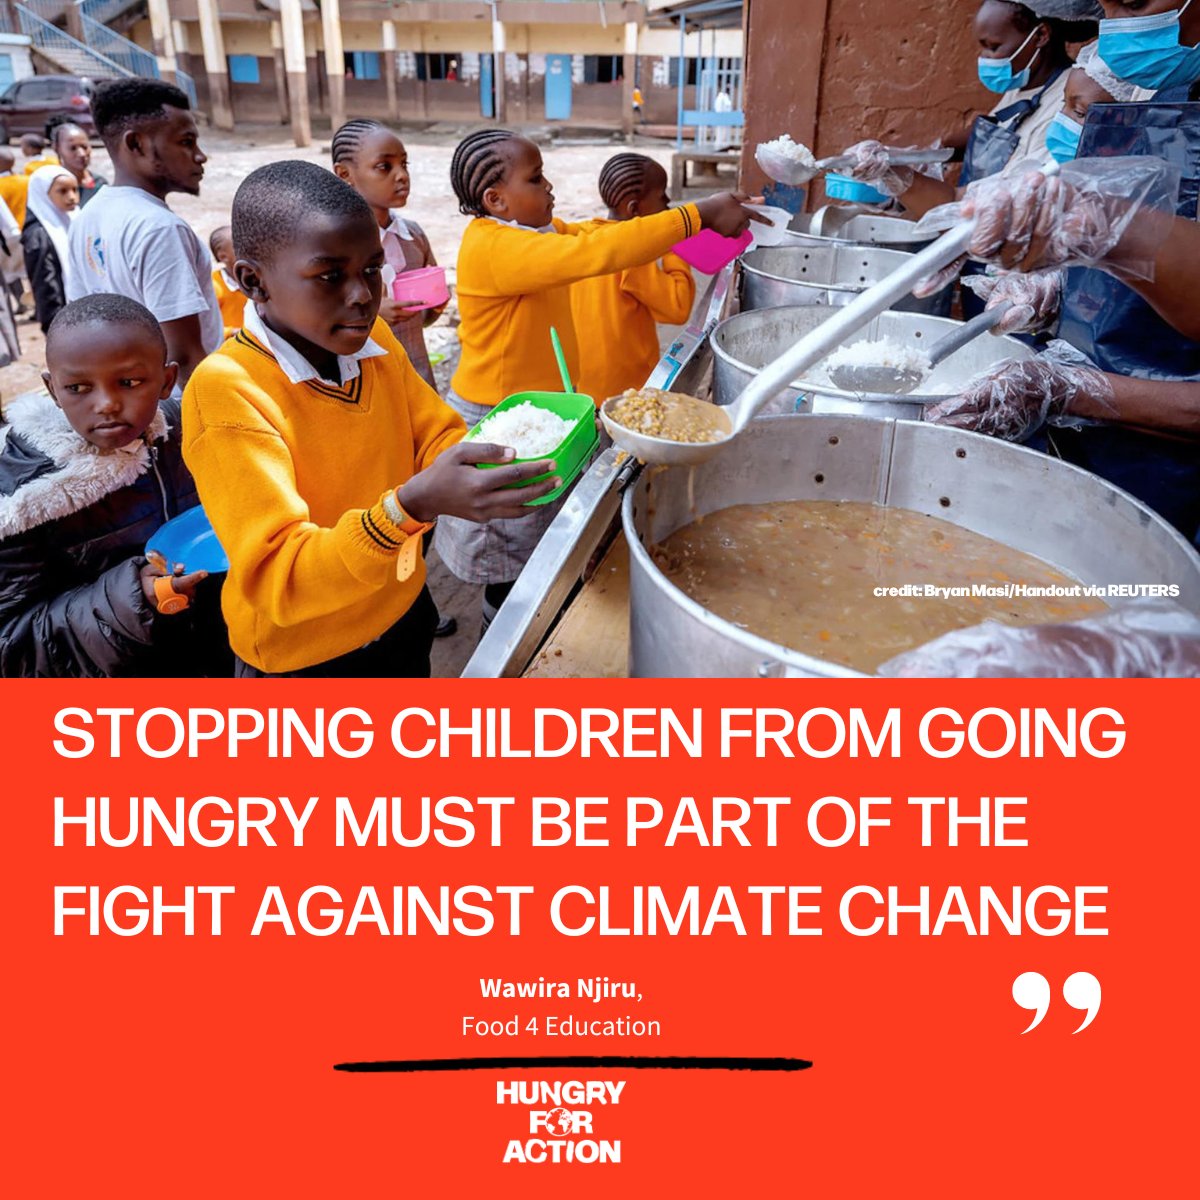 🚨Stopping children from going hungry must be part of the fight against climate change, writes @wawiranjiru of @food4education in @Reuters. It's time to save lives, build resilience, and secure the future. Read: reut.rs/3ywA6hn #HungryforAction